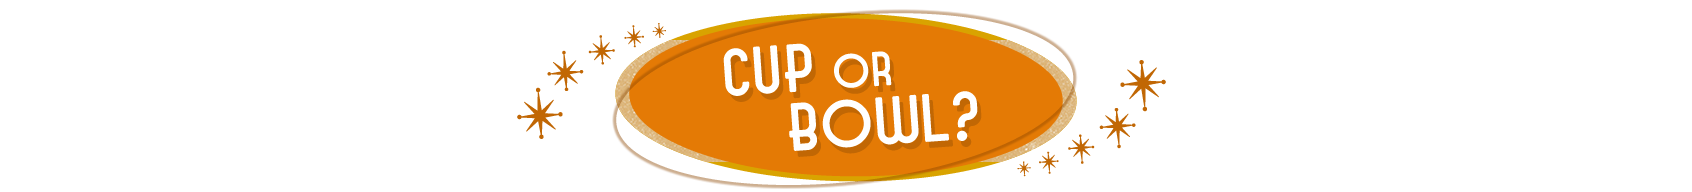 title text Cup or Bowl lunch soups